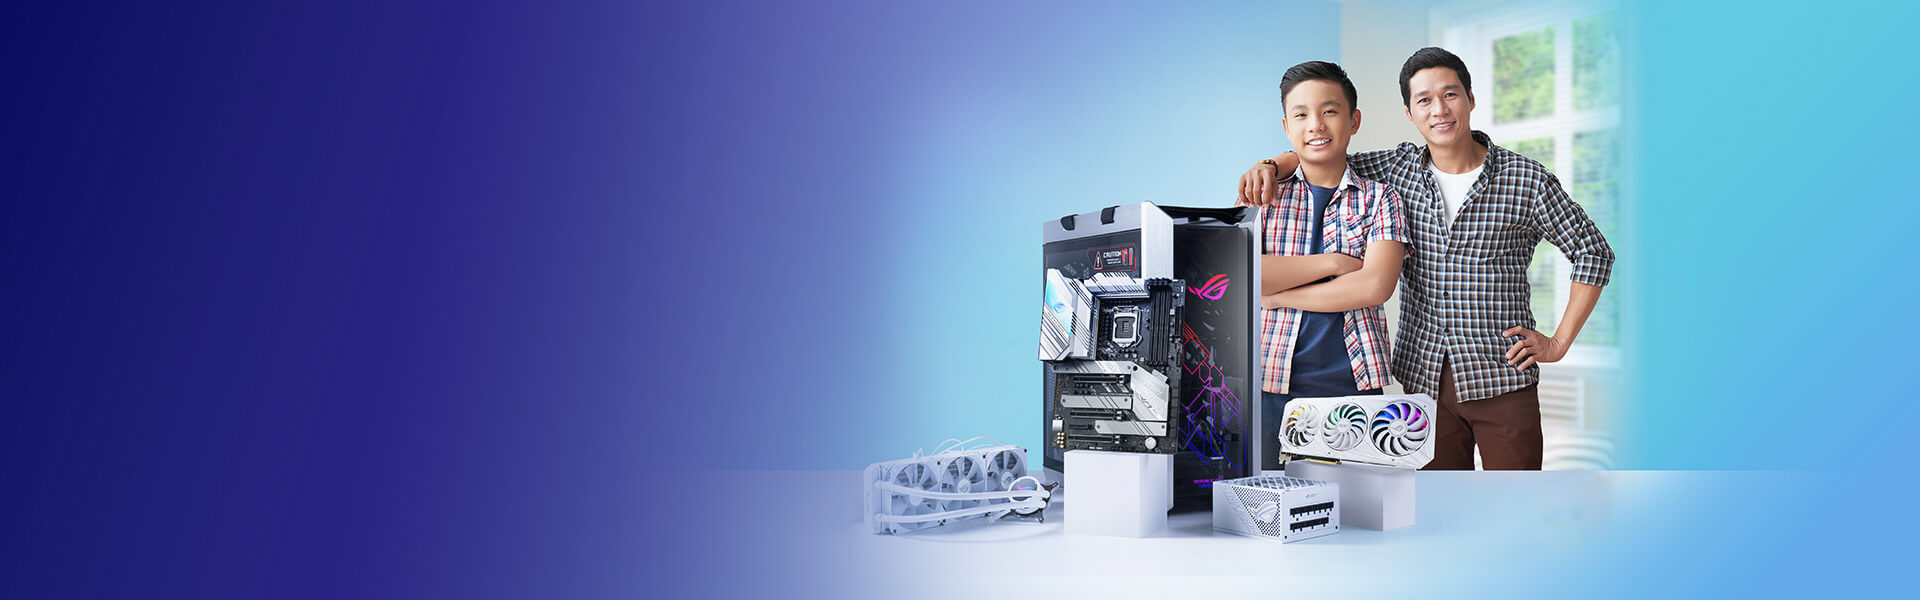 ASUS PCDIY: Let's Build Together. Plan your perfect PC with our 1-2-3 step build creator!